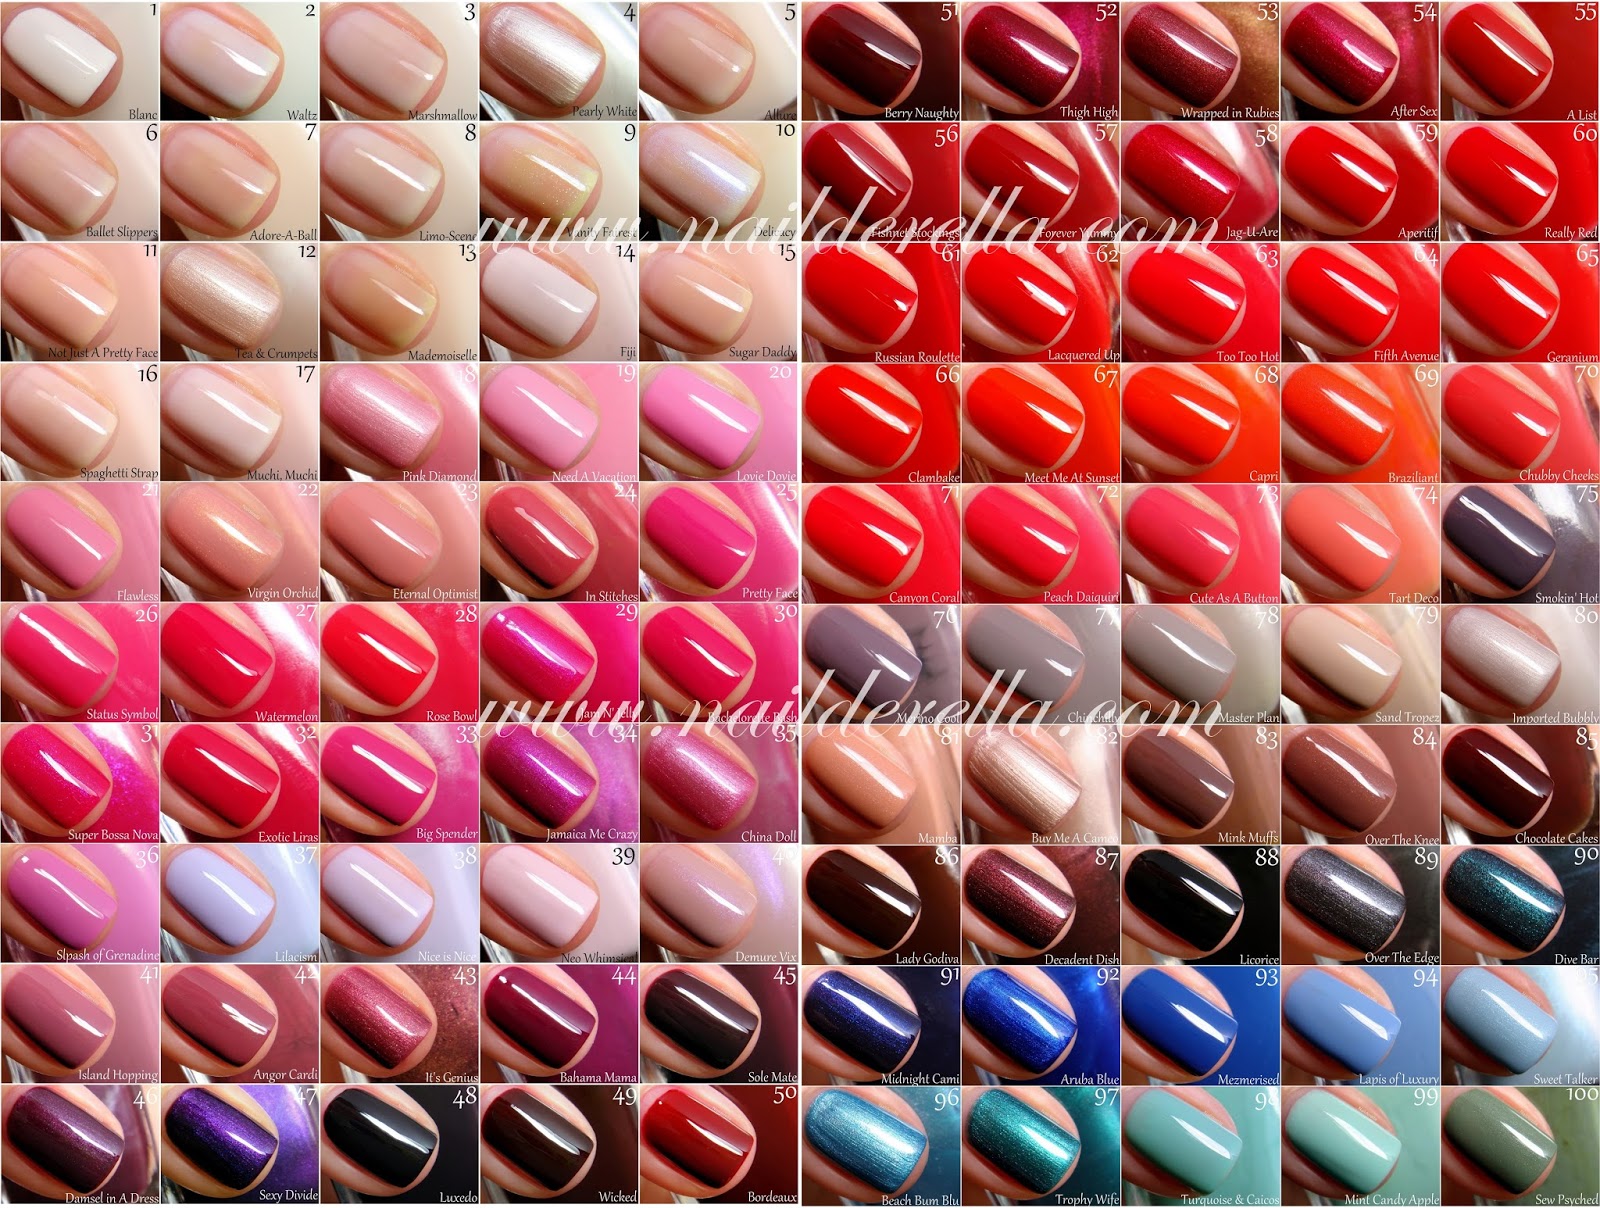 3. Complete List of Nail Polish Shades - wide 4